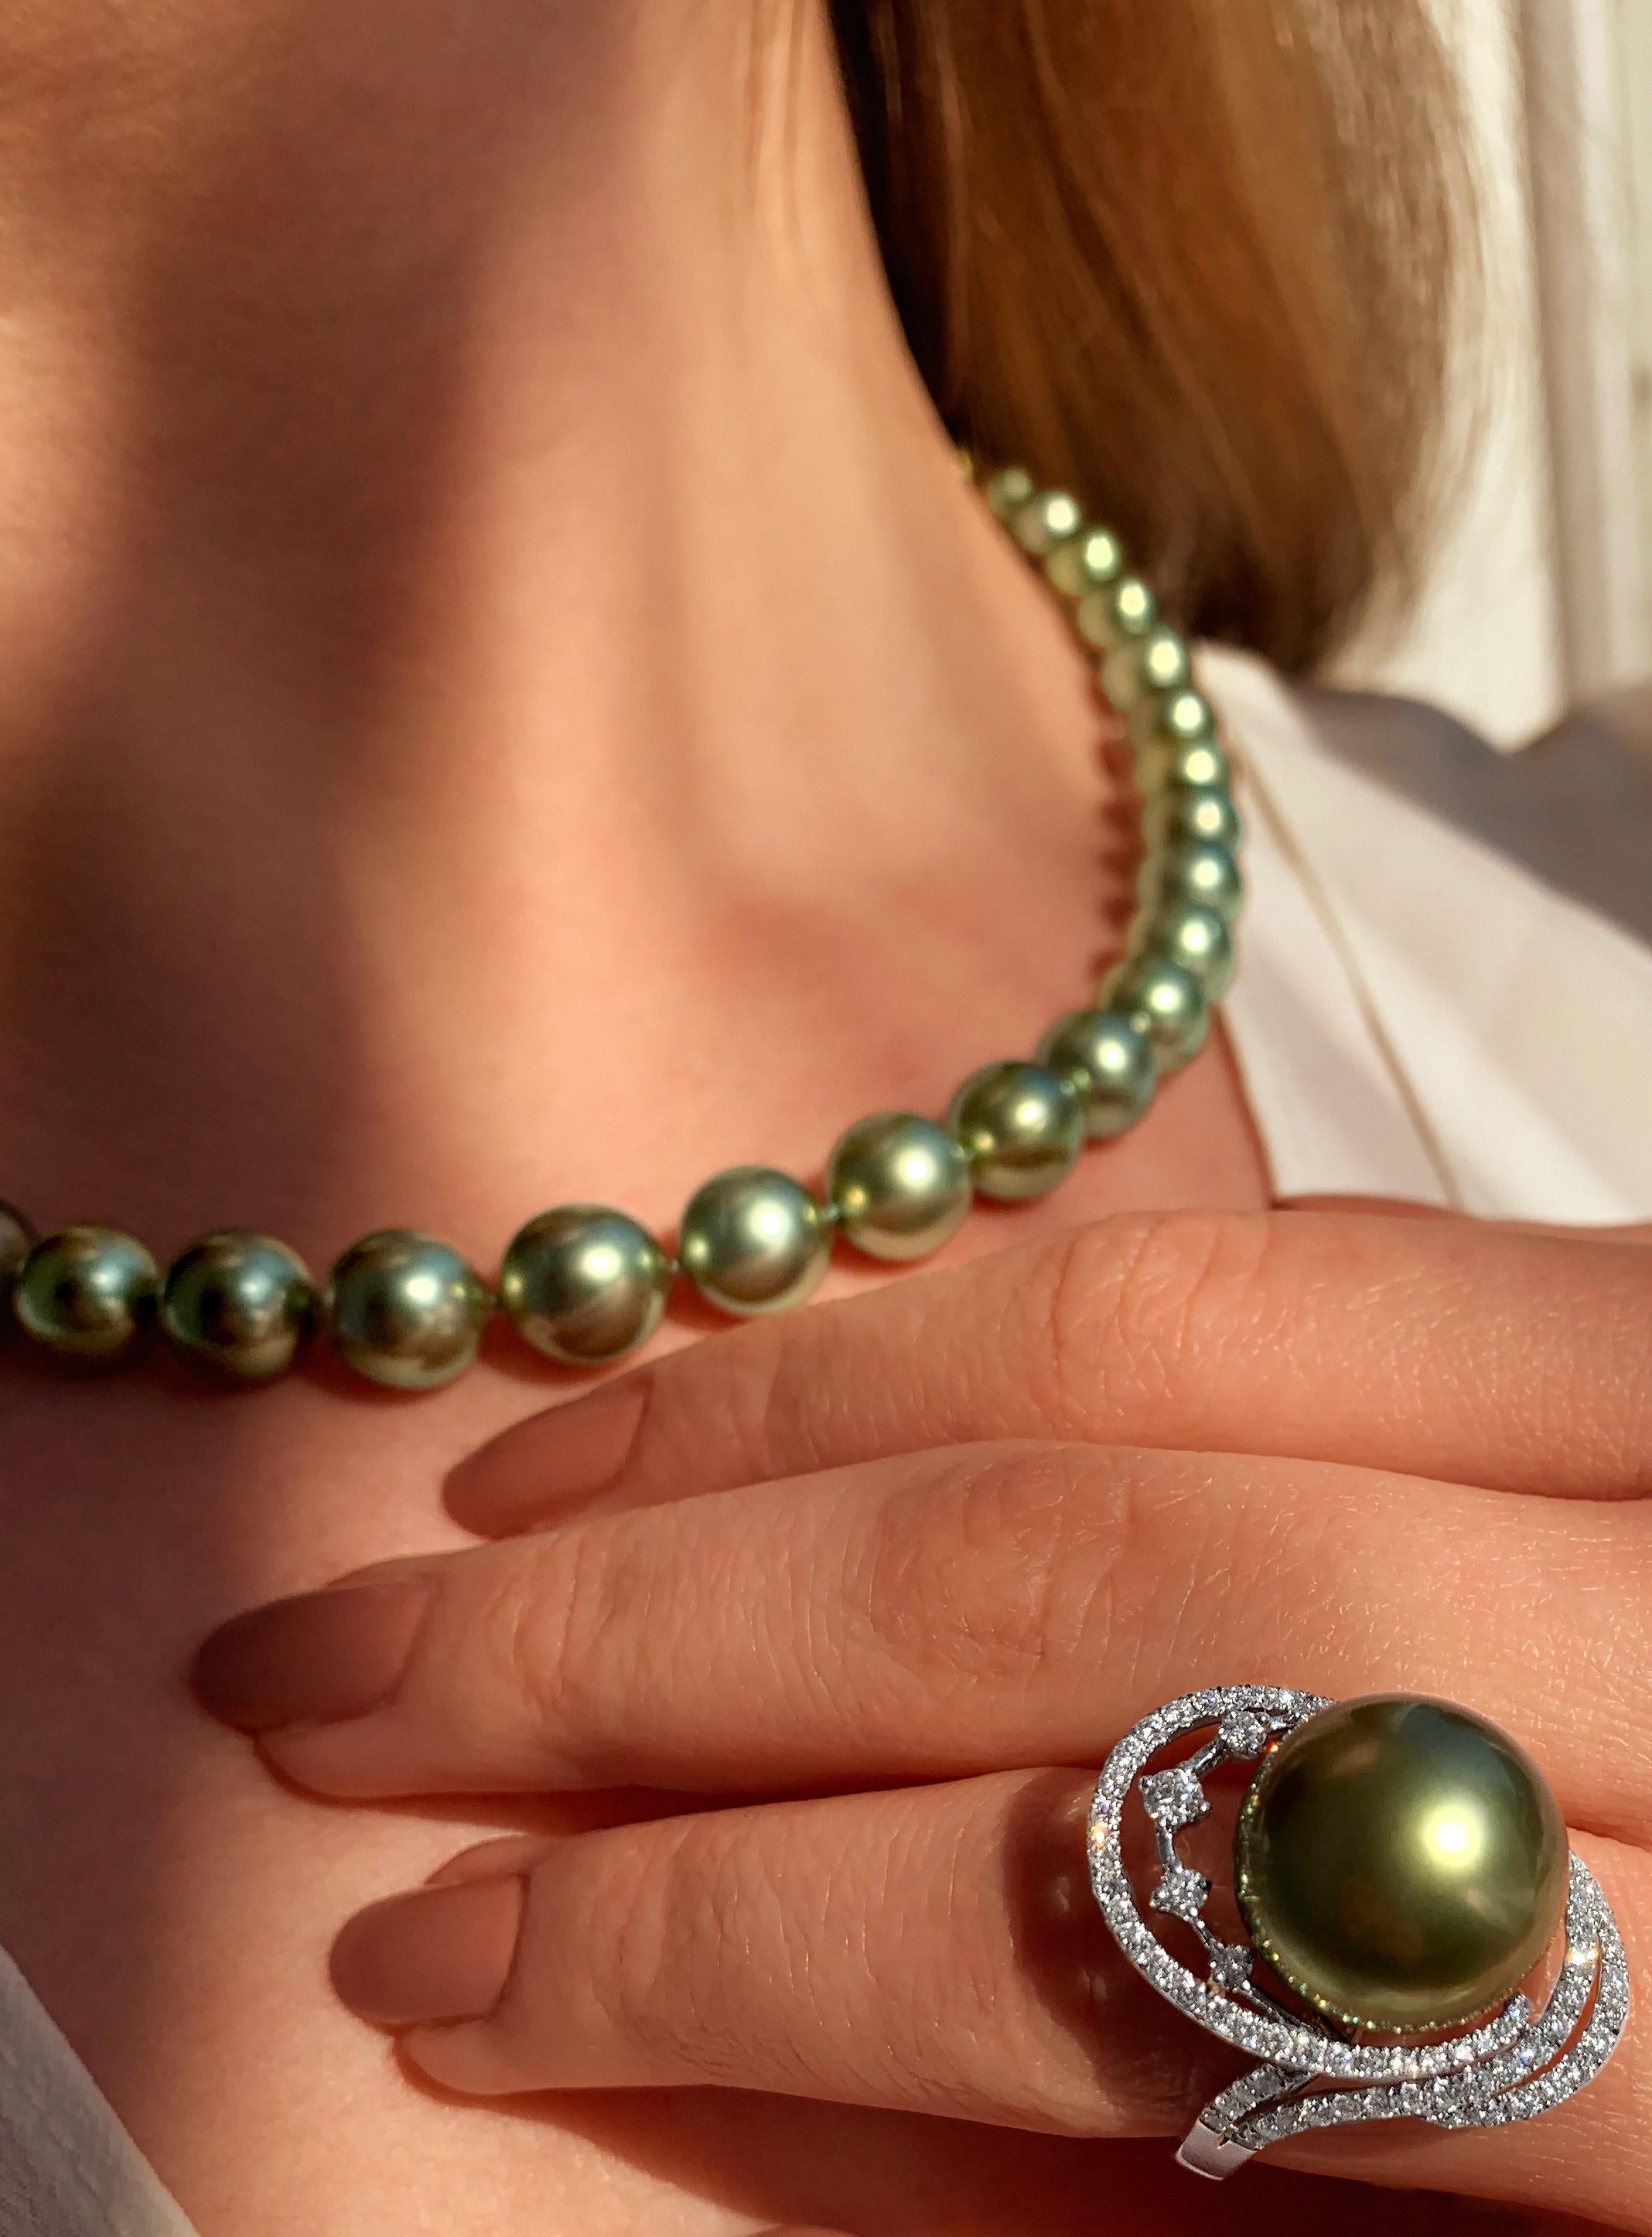 This striking ring by Yoko London is both unique and elegant. At the forefront of this piece is a vibrant pistachio-coloured Tahitian pearl; to achieve its unique hue this Tahitian pearl has been treated, resulting in an irreversible colour change.